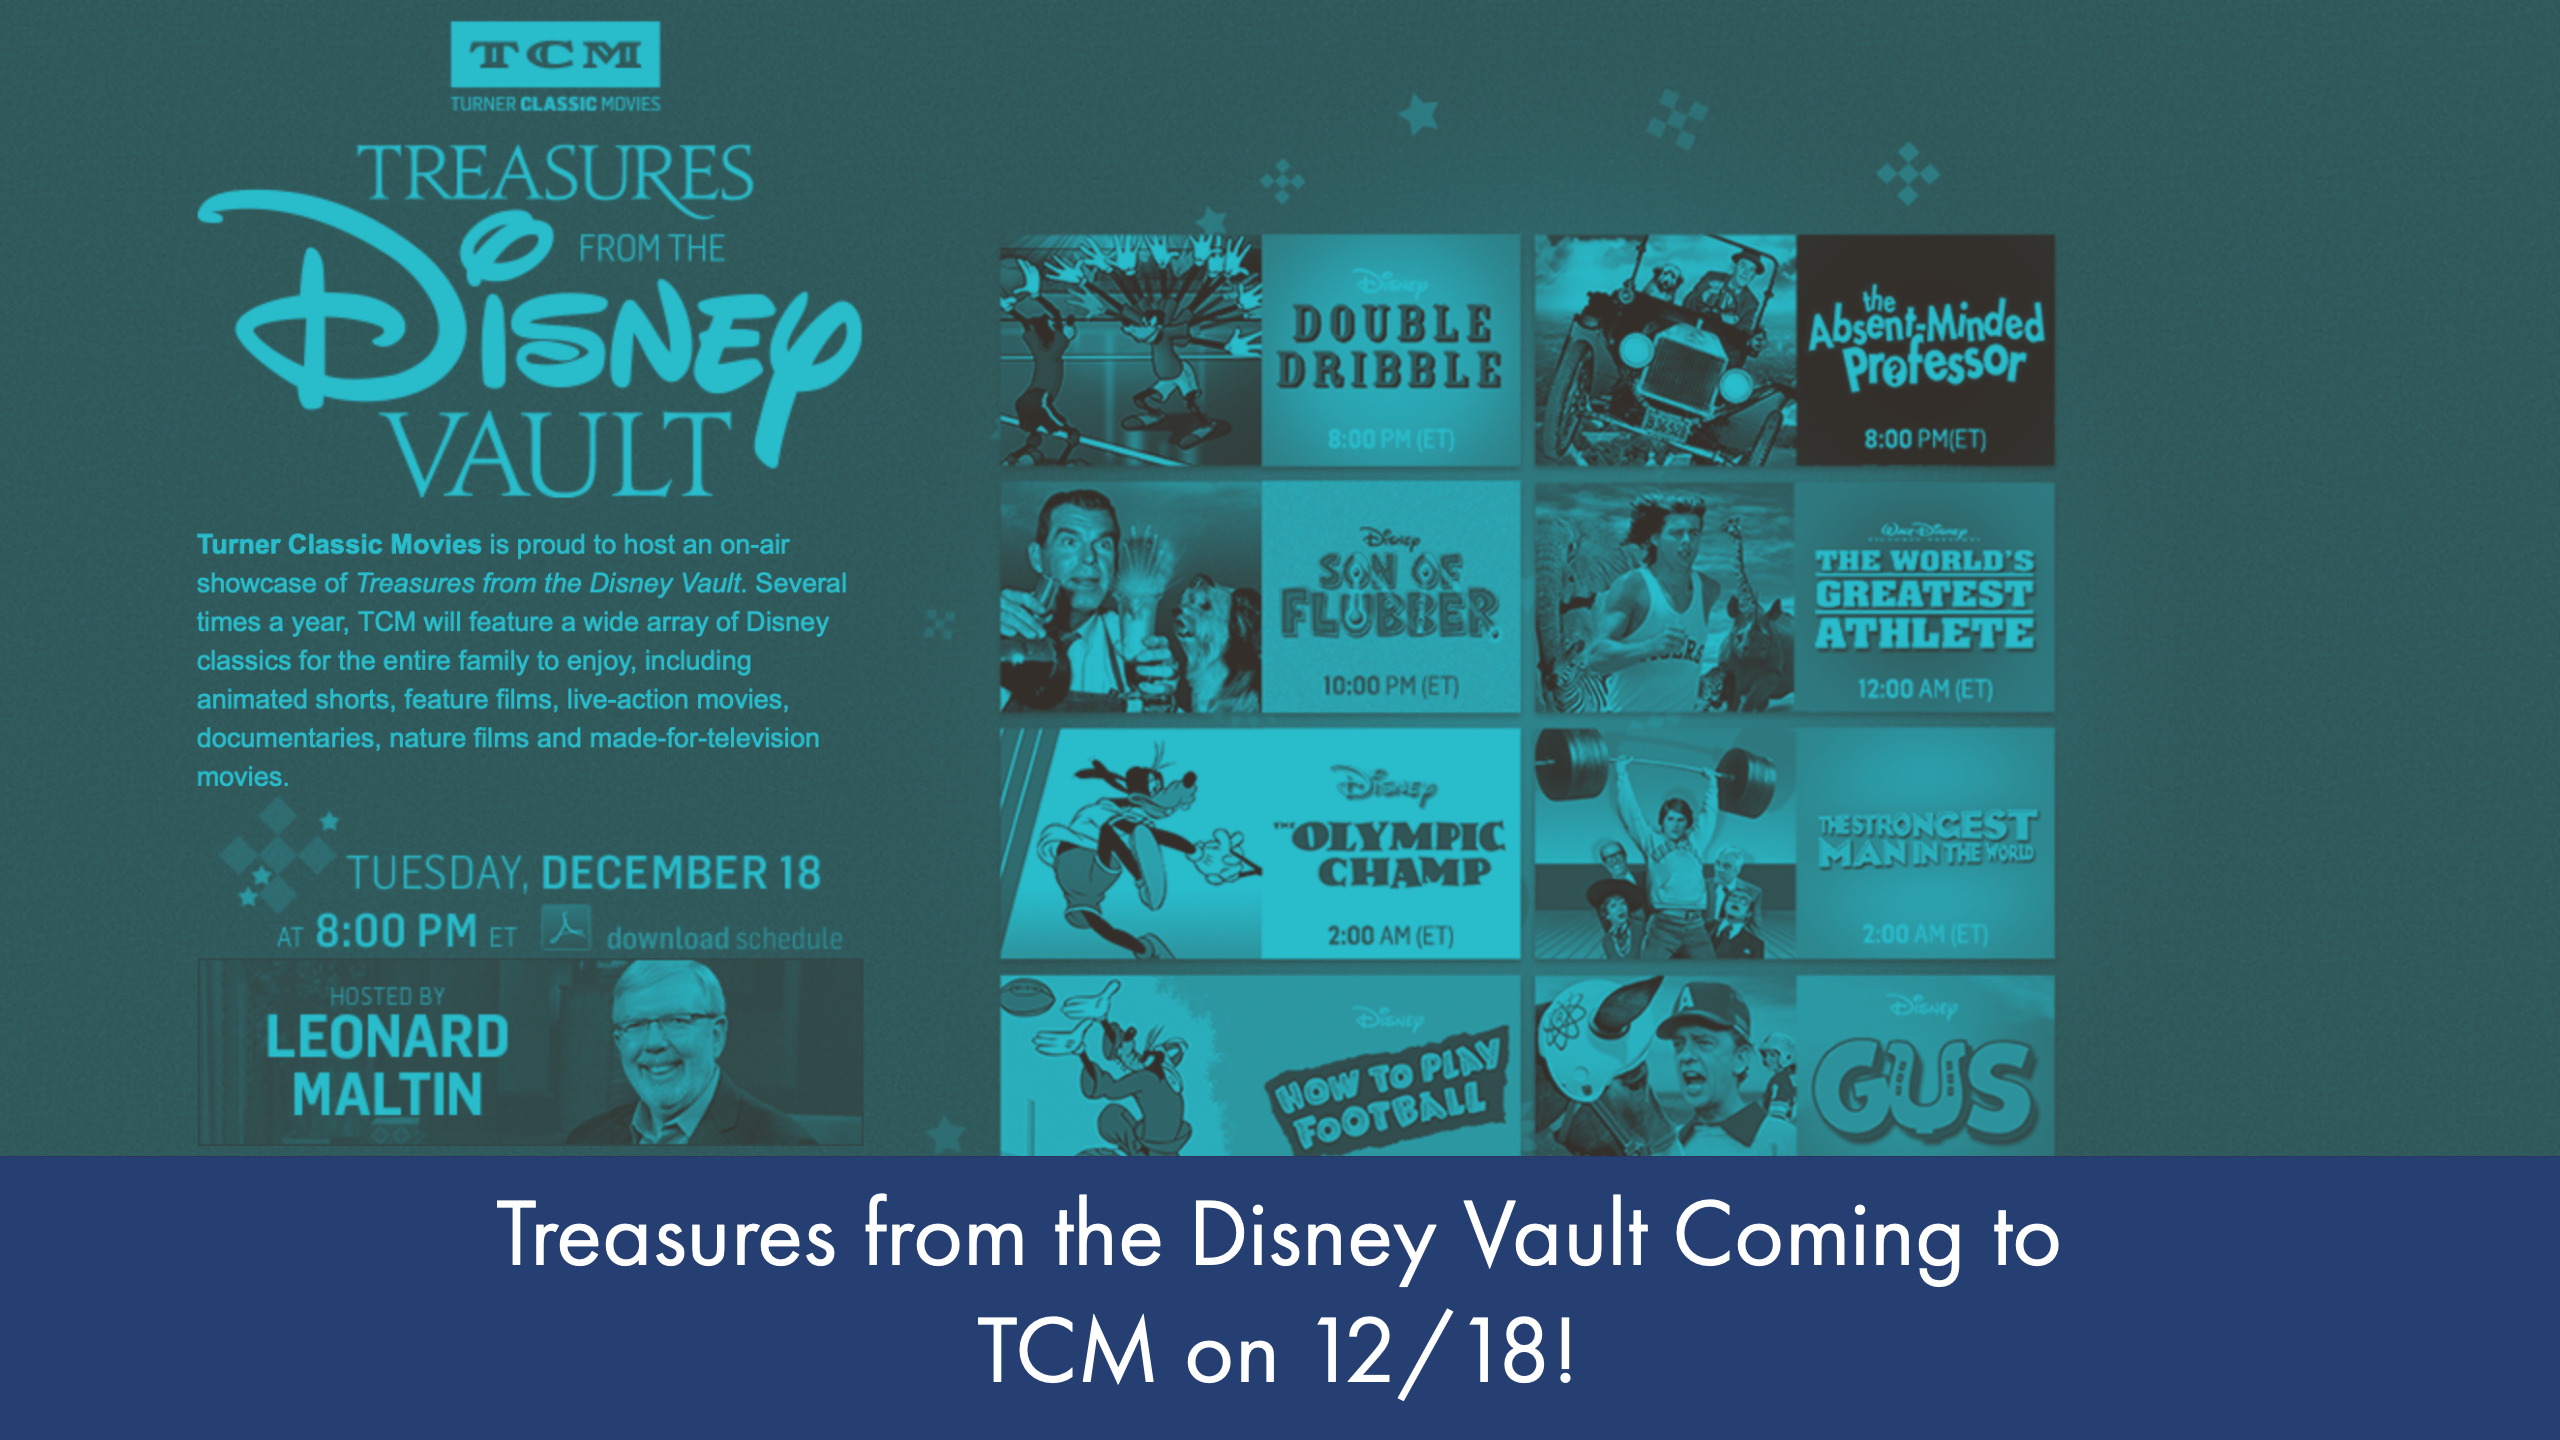 Turner Classic Movies to Host Disney Classics with Treasures From the Disney Vault on December 18, 2018!